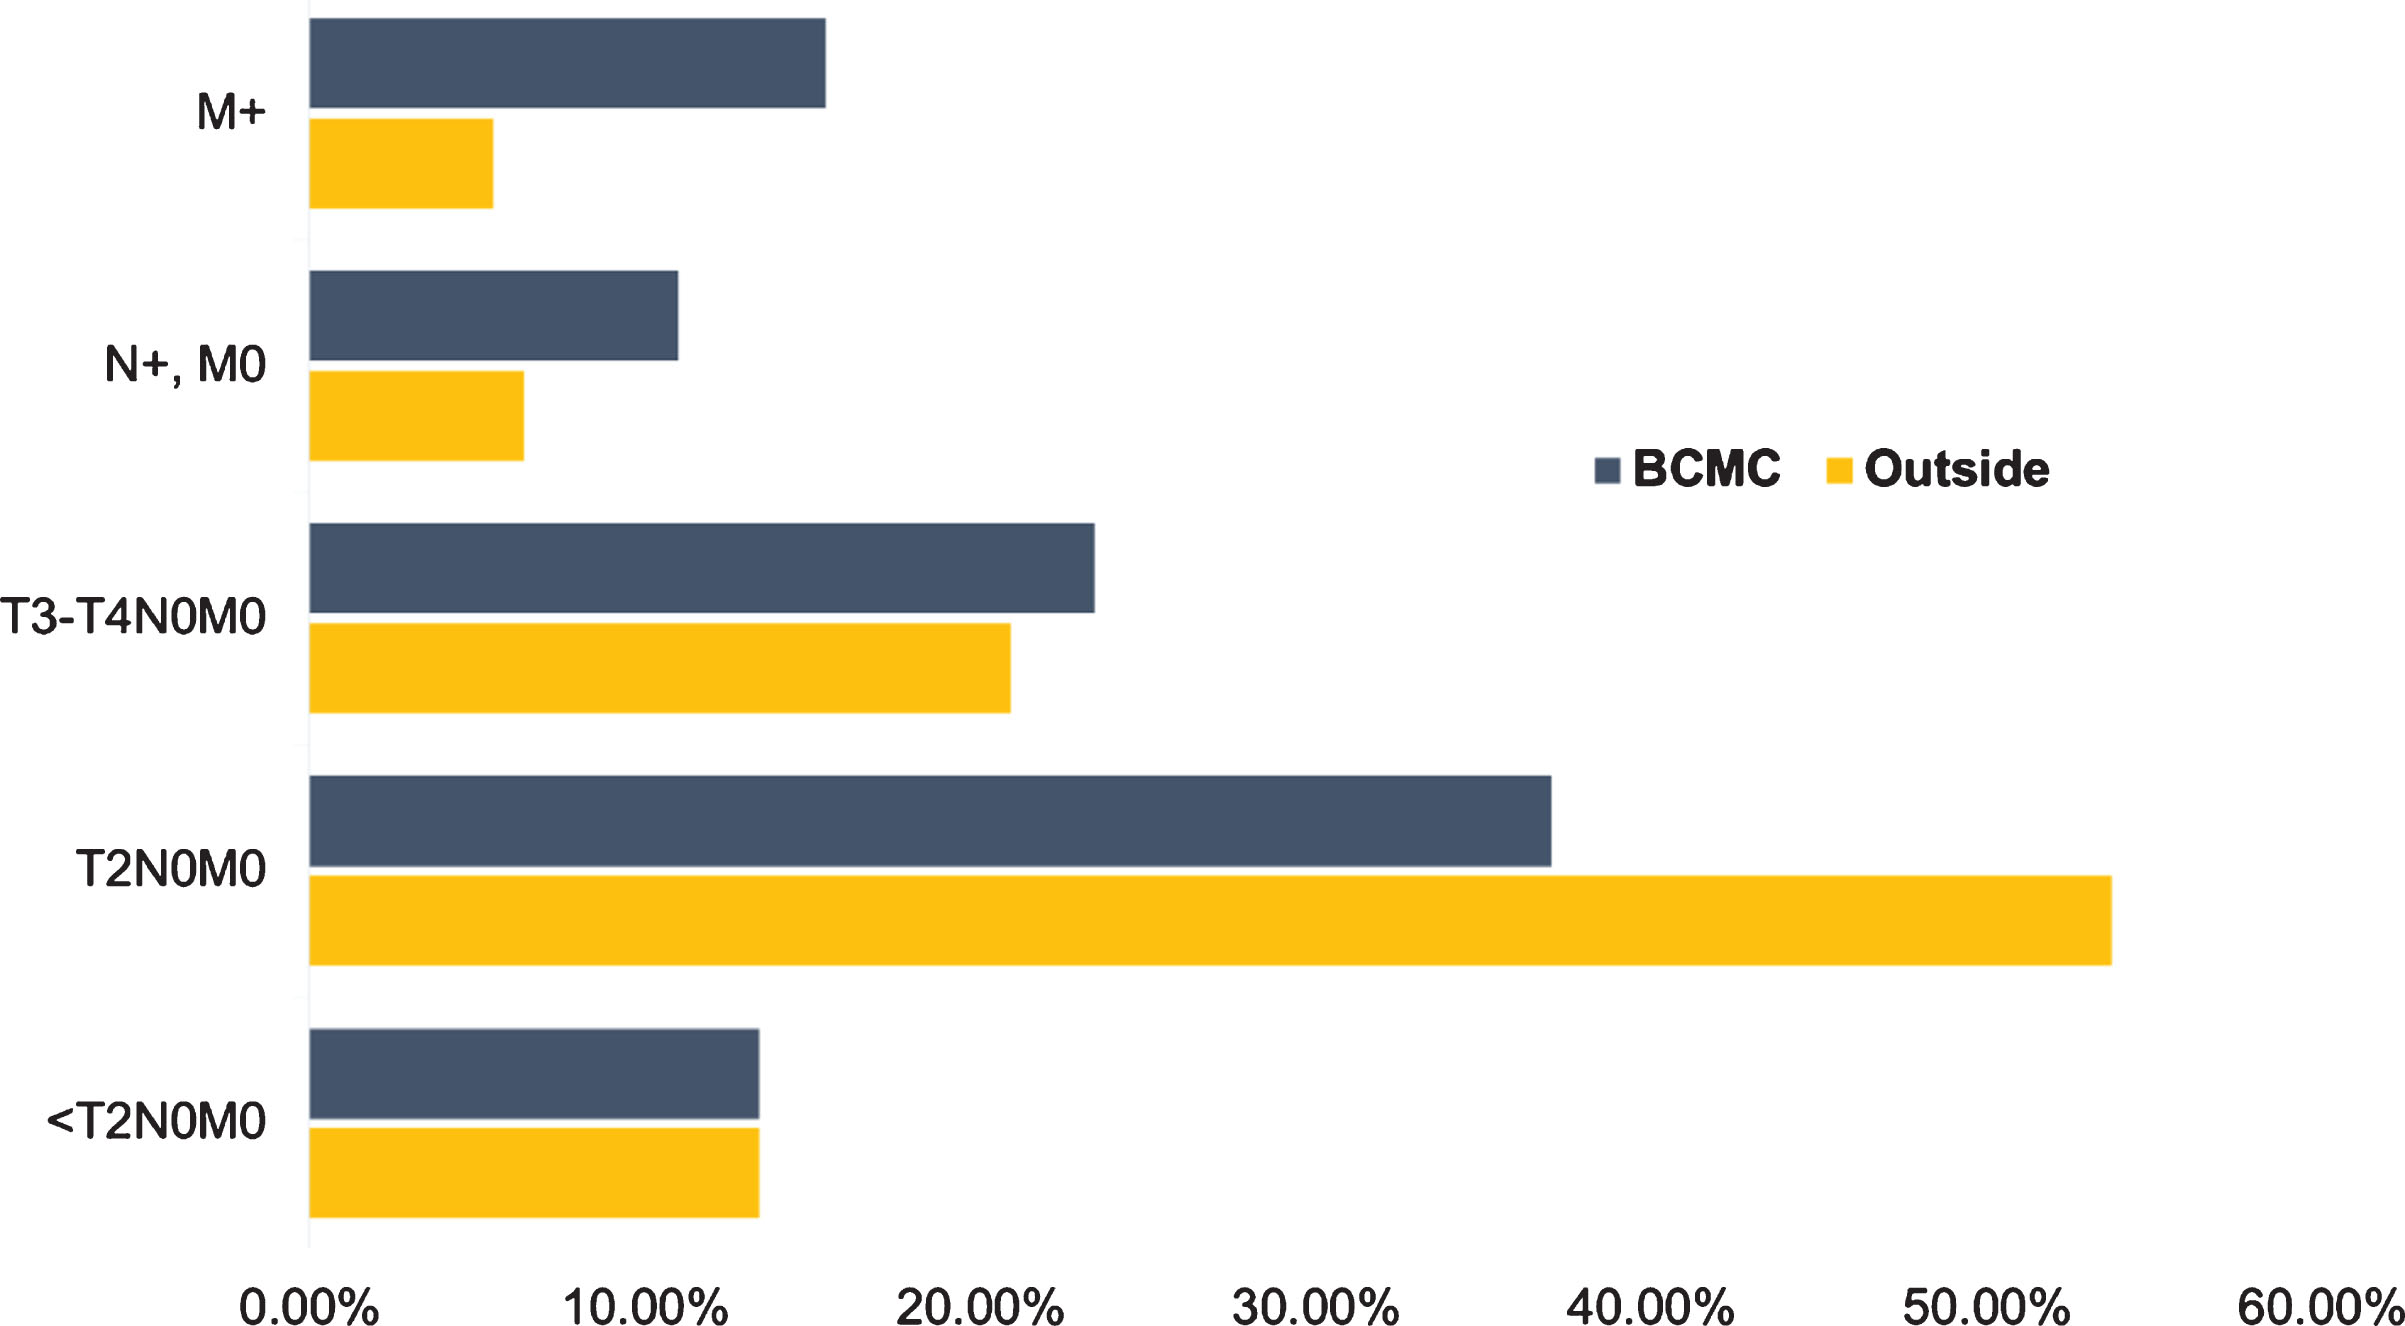 Clinical staging differences between outside institutions and Bladder Cancer Multidisciplinary Clinic. Abbreviations: BCMC - Bladder Cancer Multidisciplinary Clinic, T - tumor stage, N - nodal stage, M - distant metastasis.